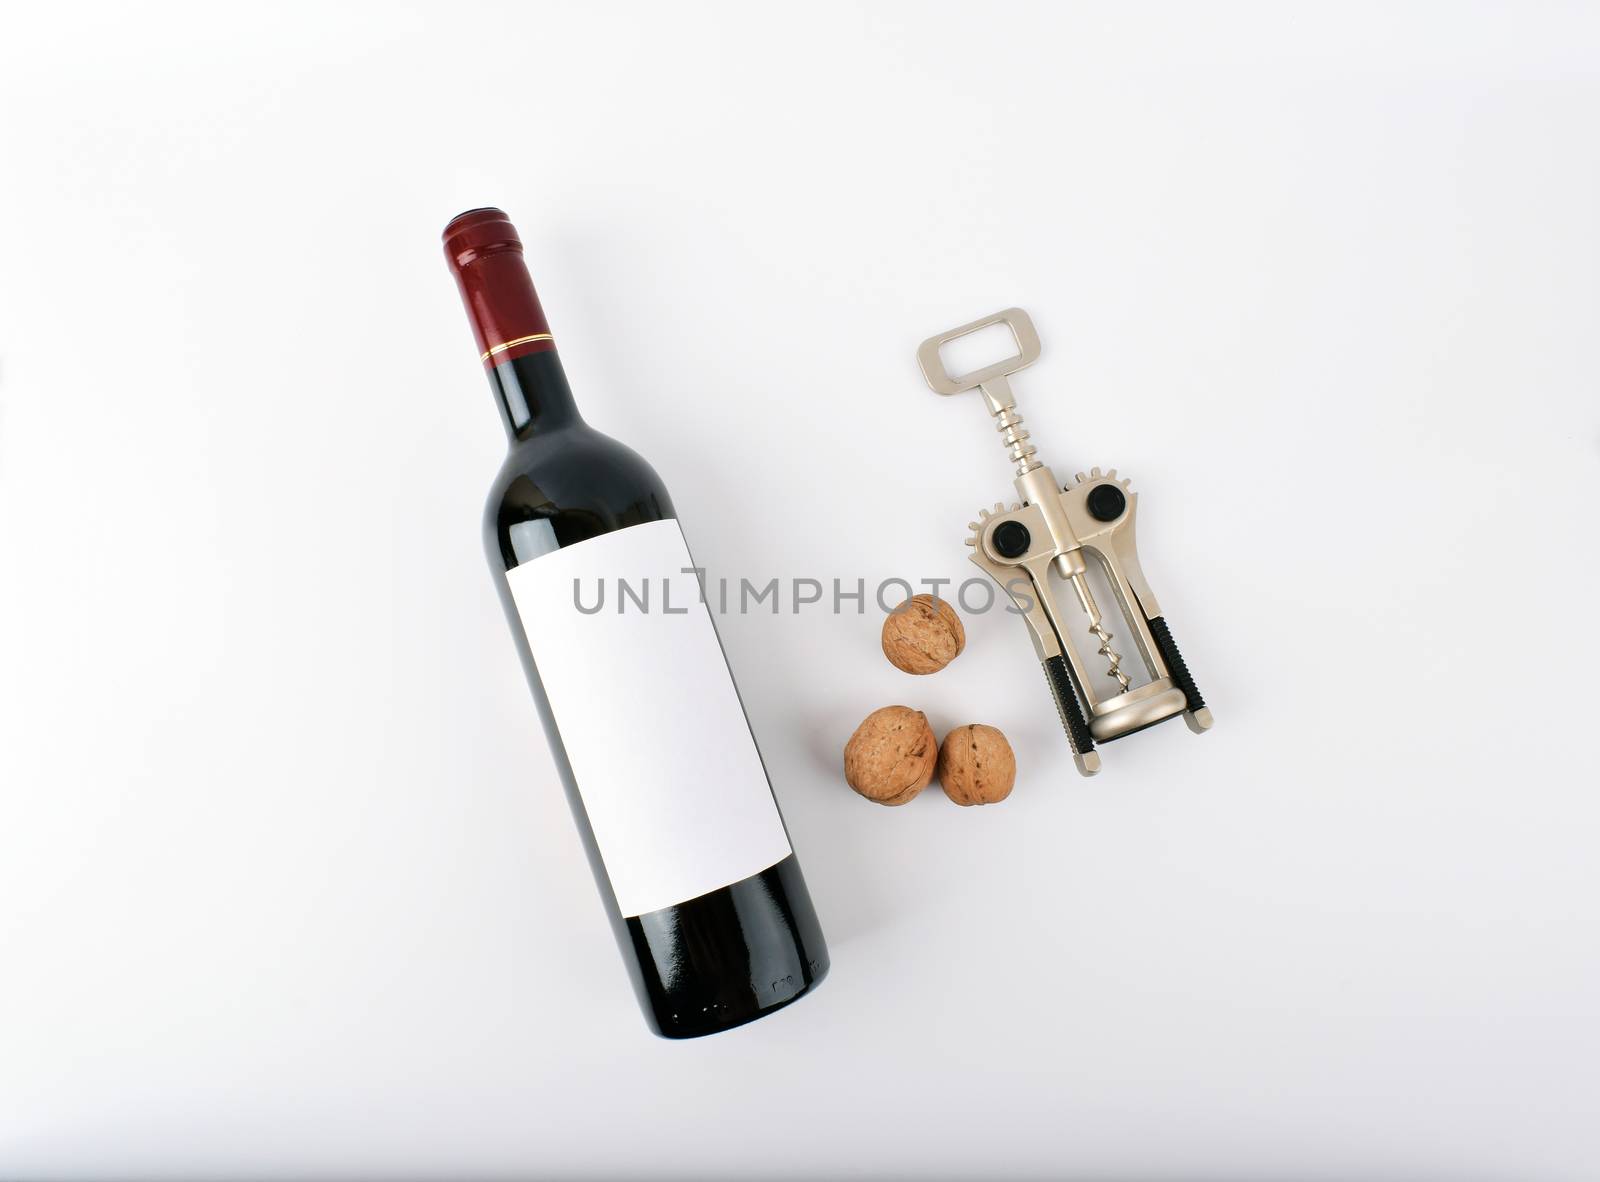 mockup wine bottle with three nuts, isolated on white background with copy space, front view.